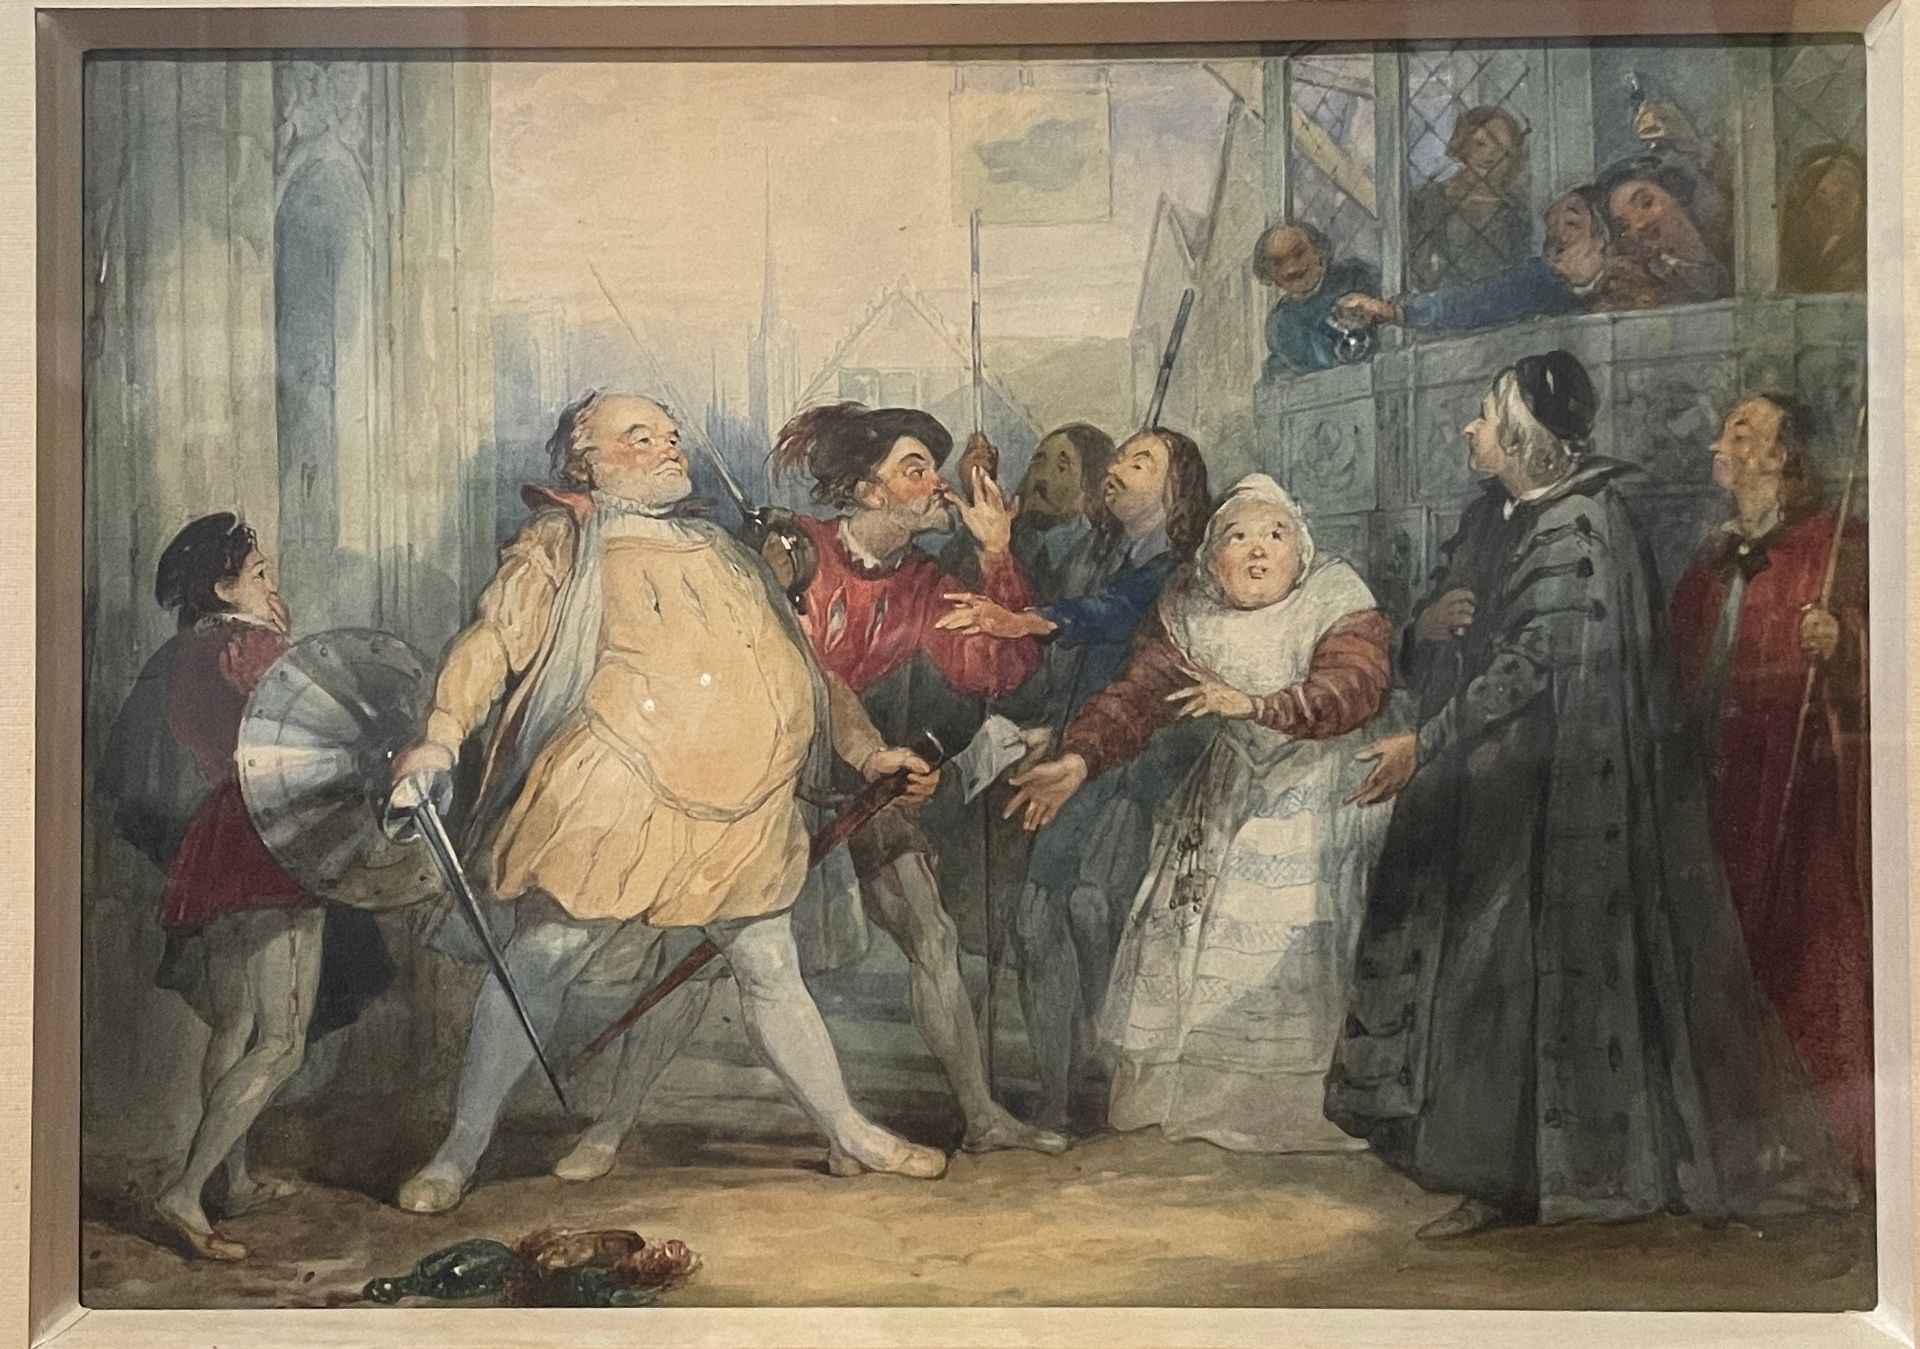 Null FRENCH SCHOOL OF THE 19TH CENTURY

Theater scene

Watercolor

23,5 x 33 cm
&hellip;